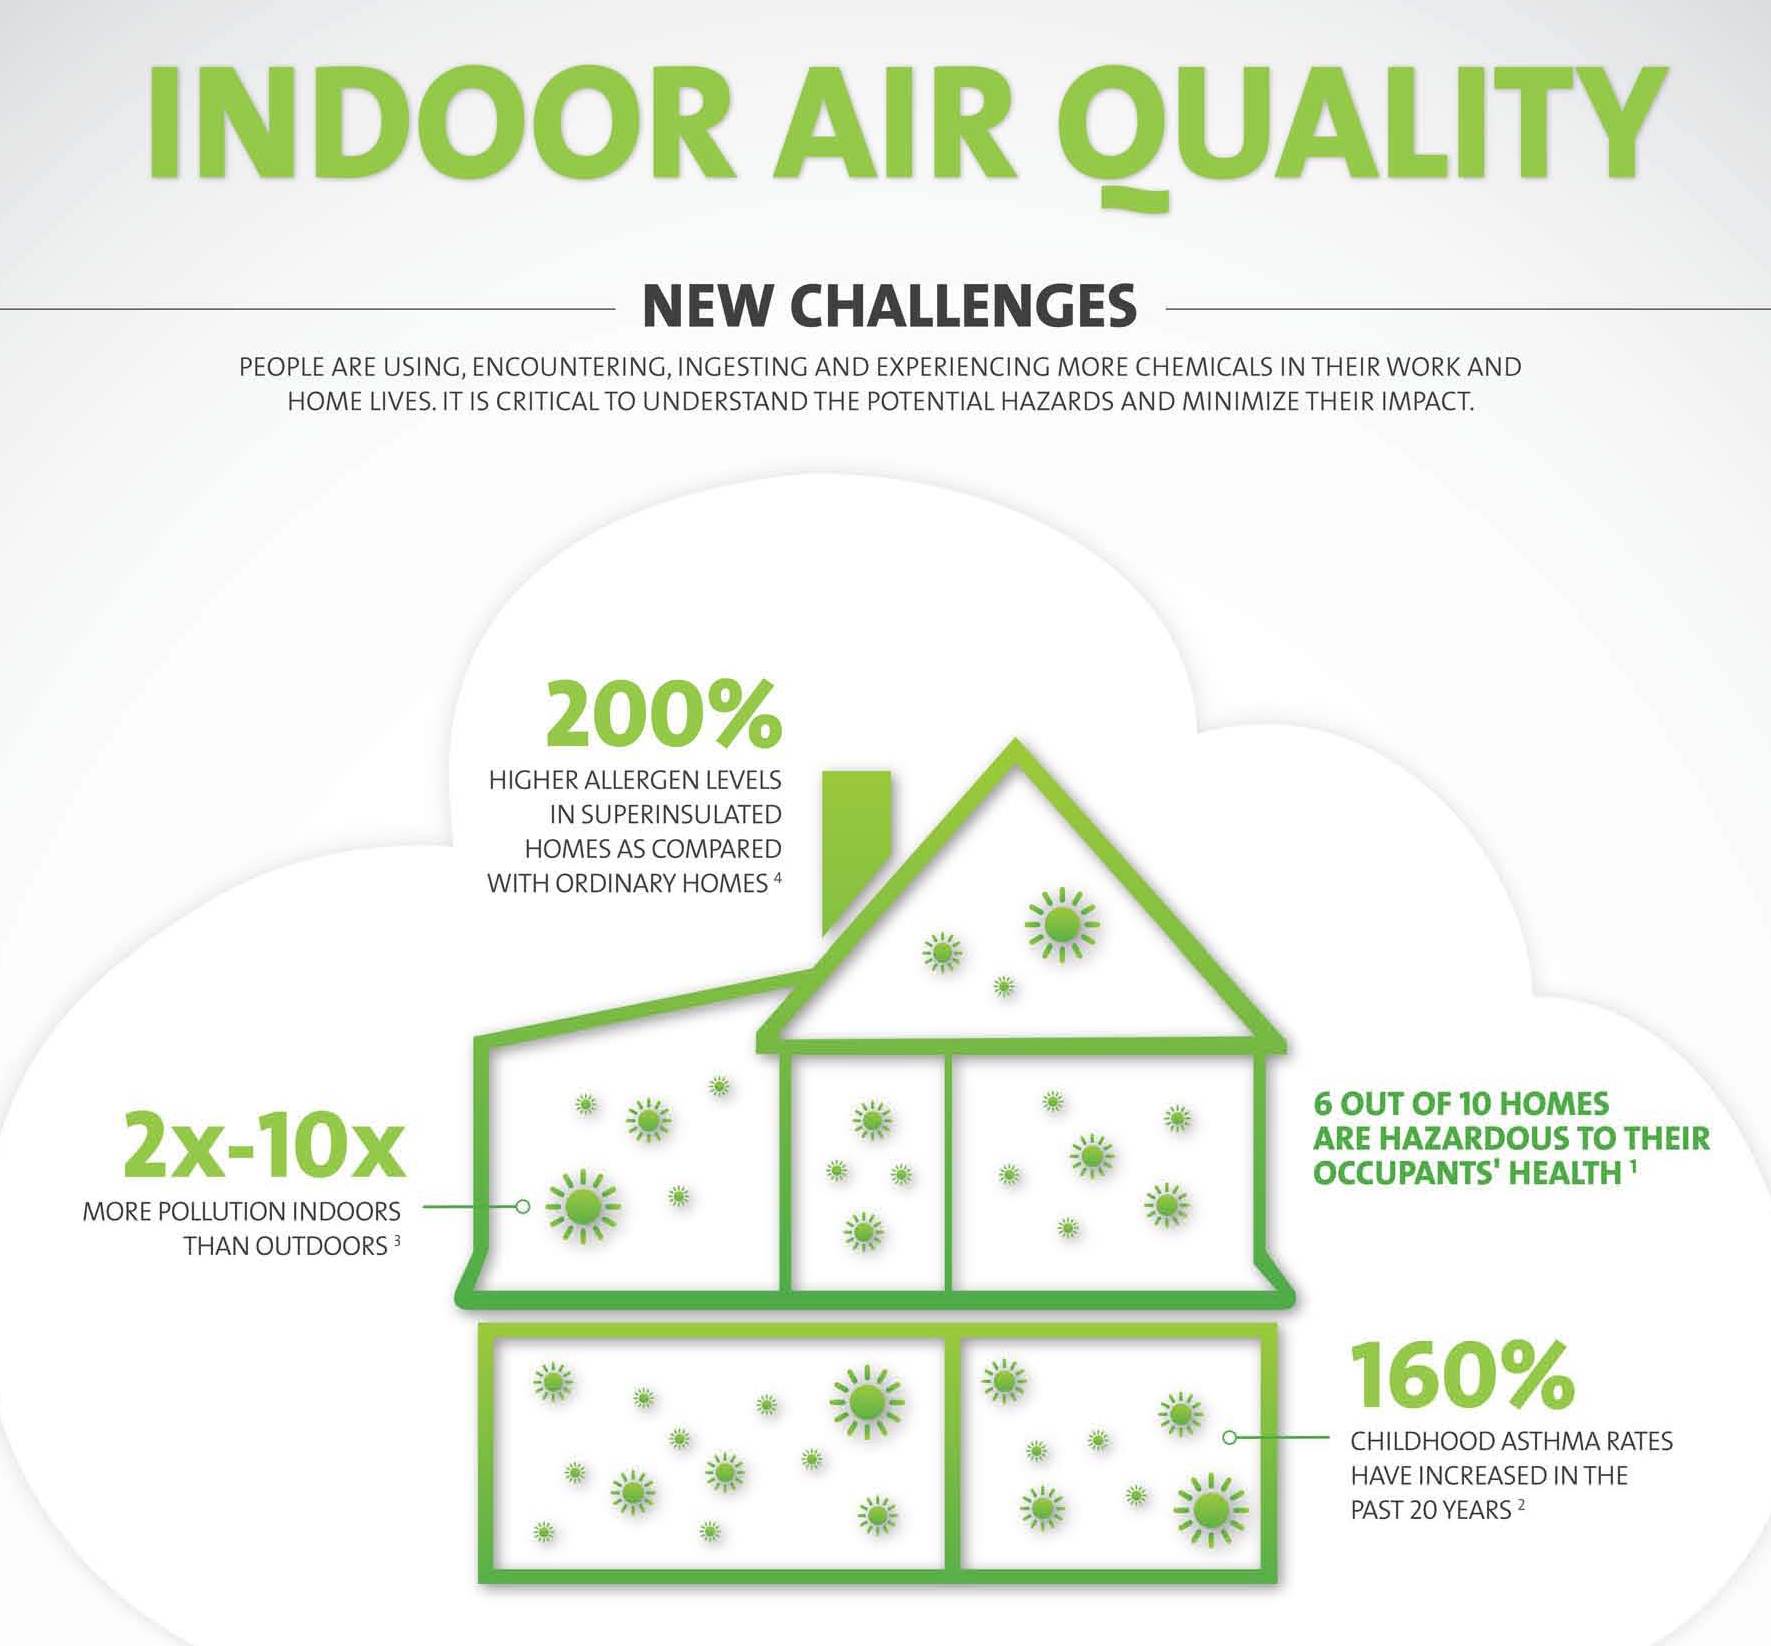 Indoor Air Quality, indoor air pollution, outdoor air pollution, air toxins